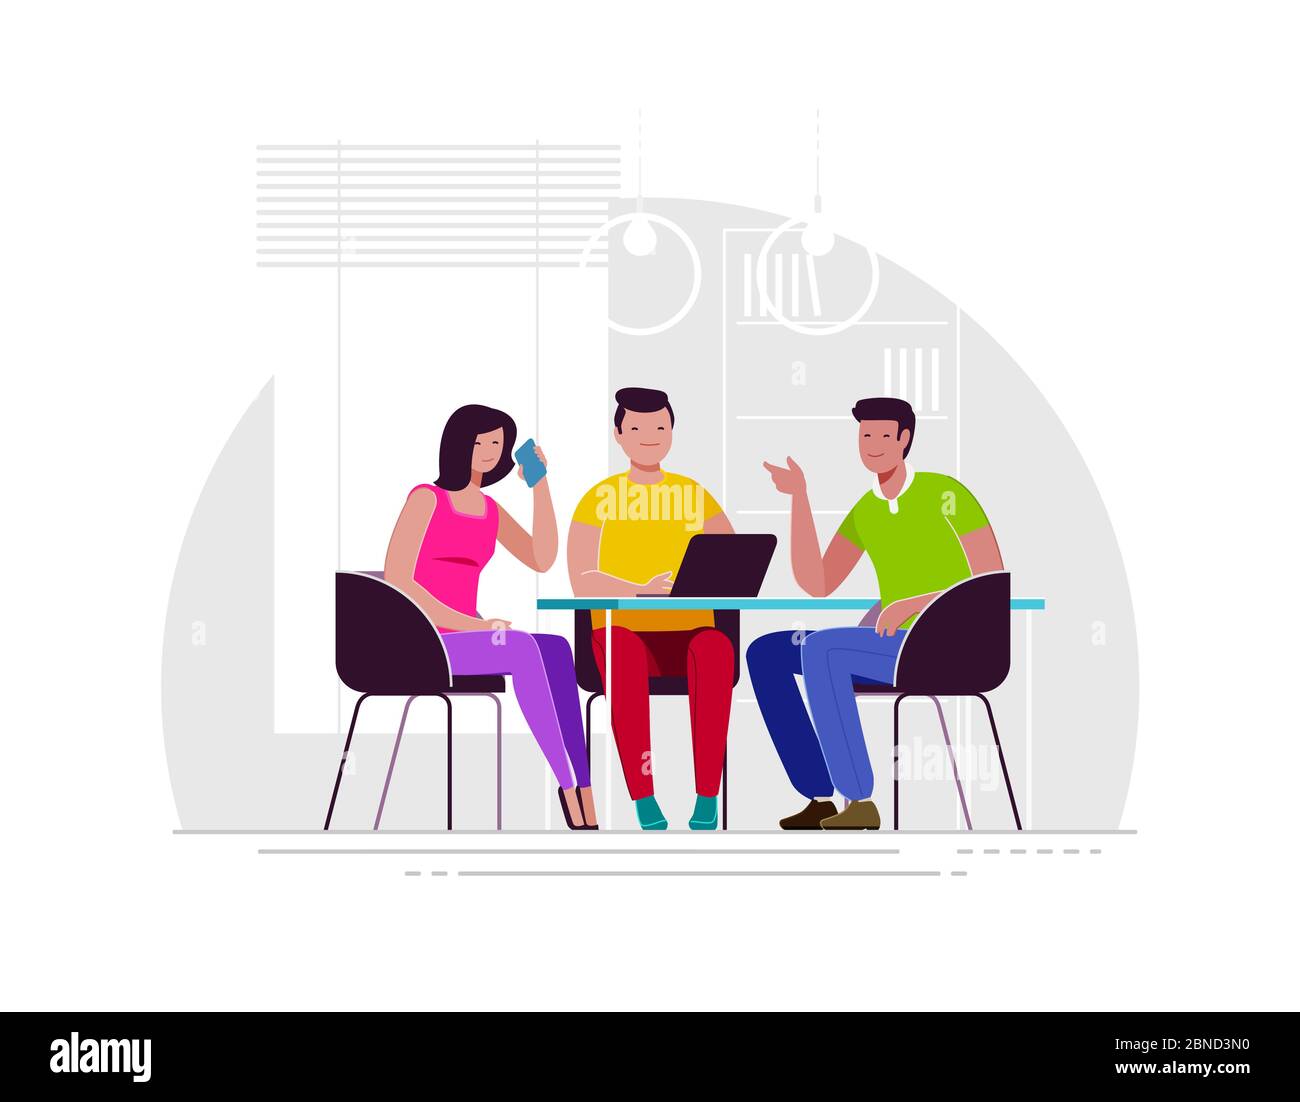 Teamwork, brainstorm. Employees negotiating while sitting at table Stock Vector